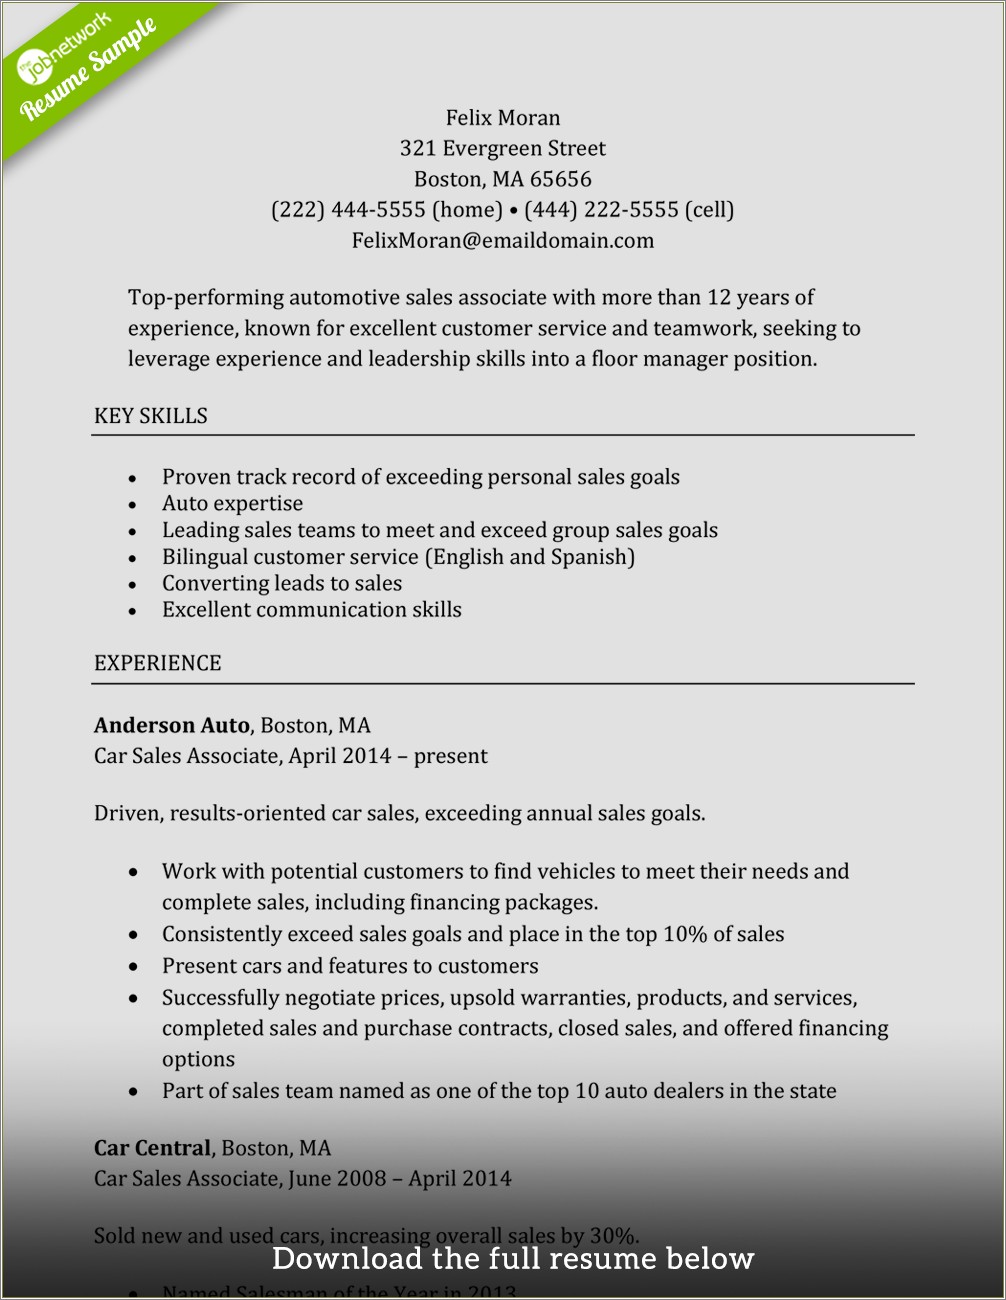 Sample Resume With Dog Walking Experience